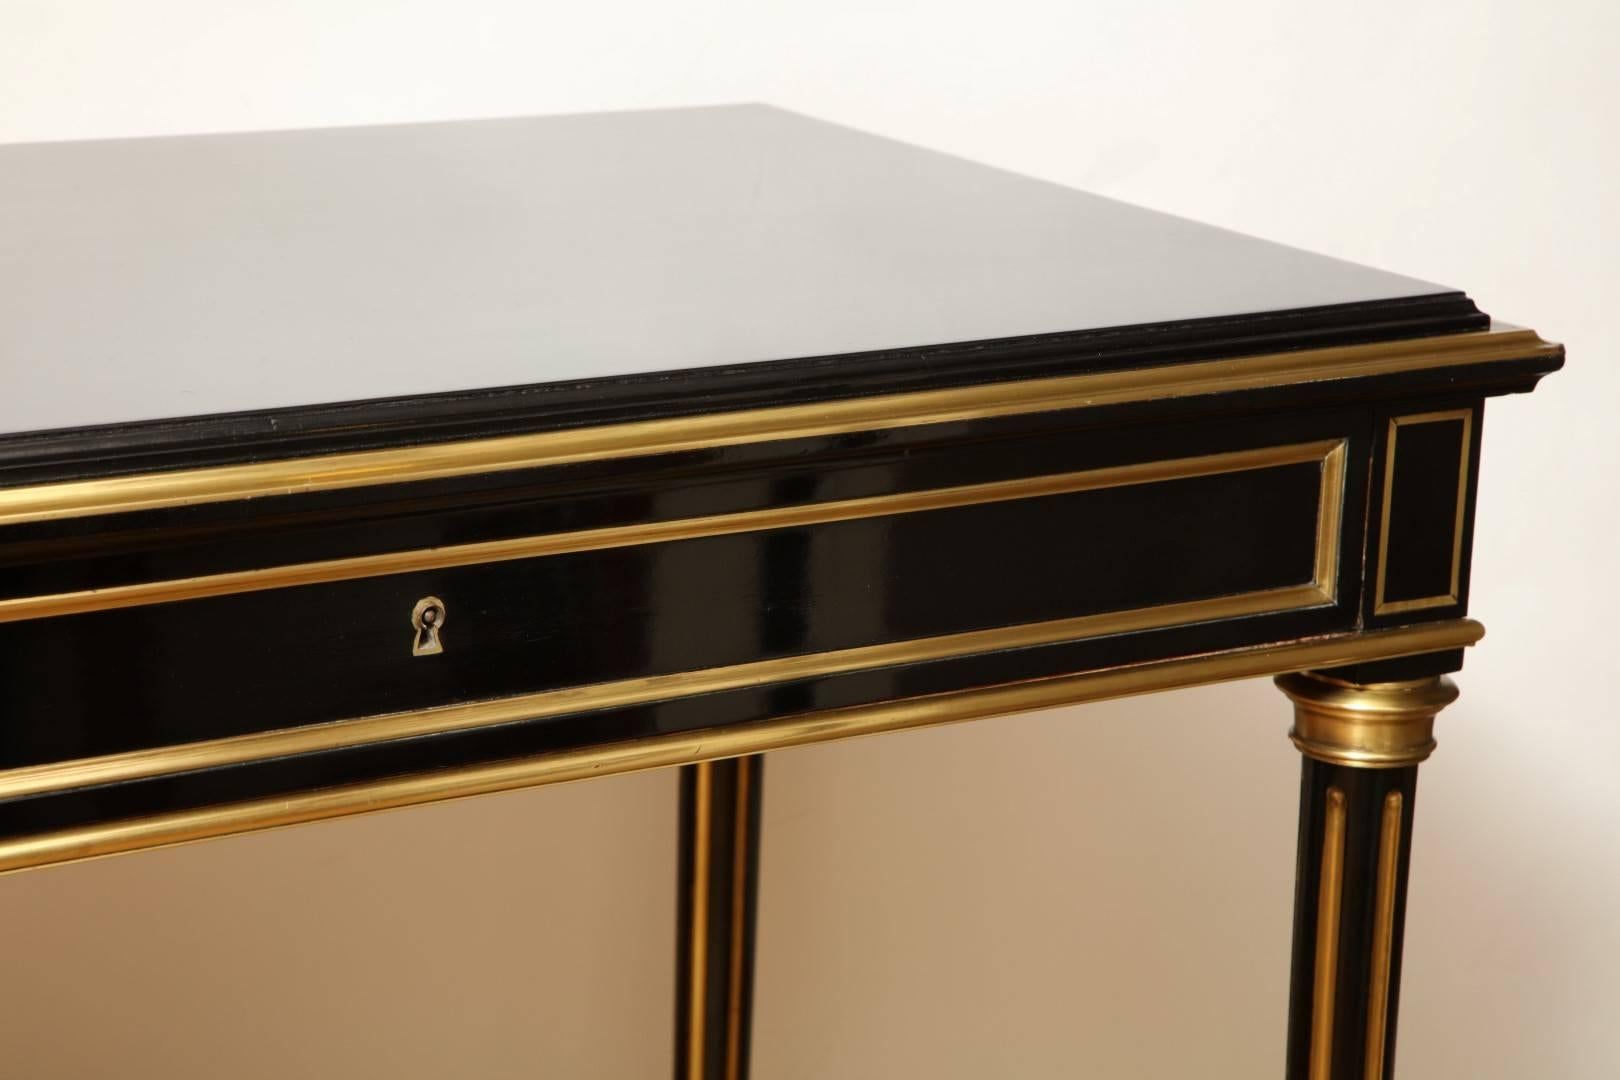 A French Directoire style ebonized desk. The ebonized mahogany frame having top with inset molded brass edge, supported by four brass fluted legs terminating in toupie feet